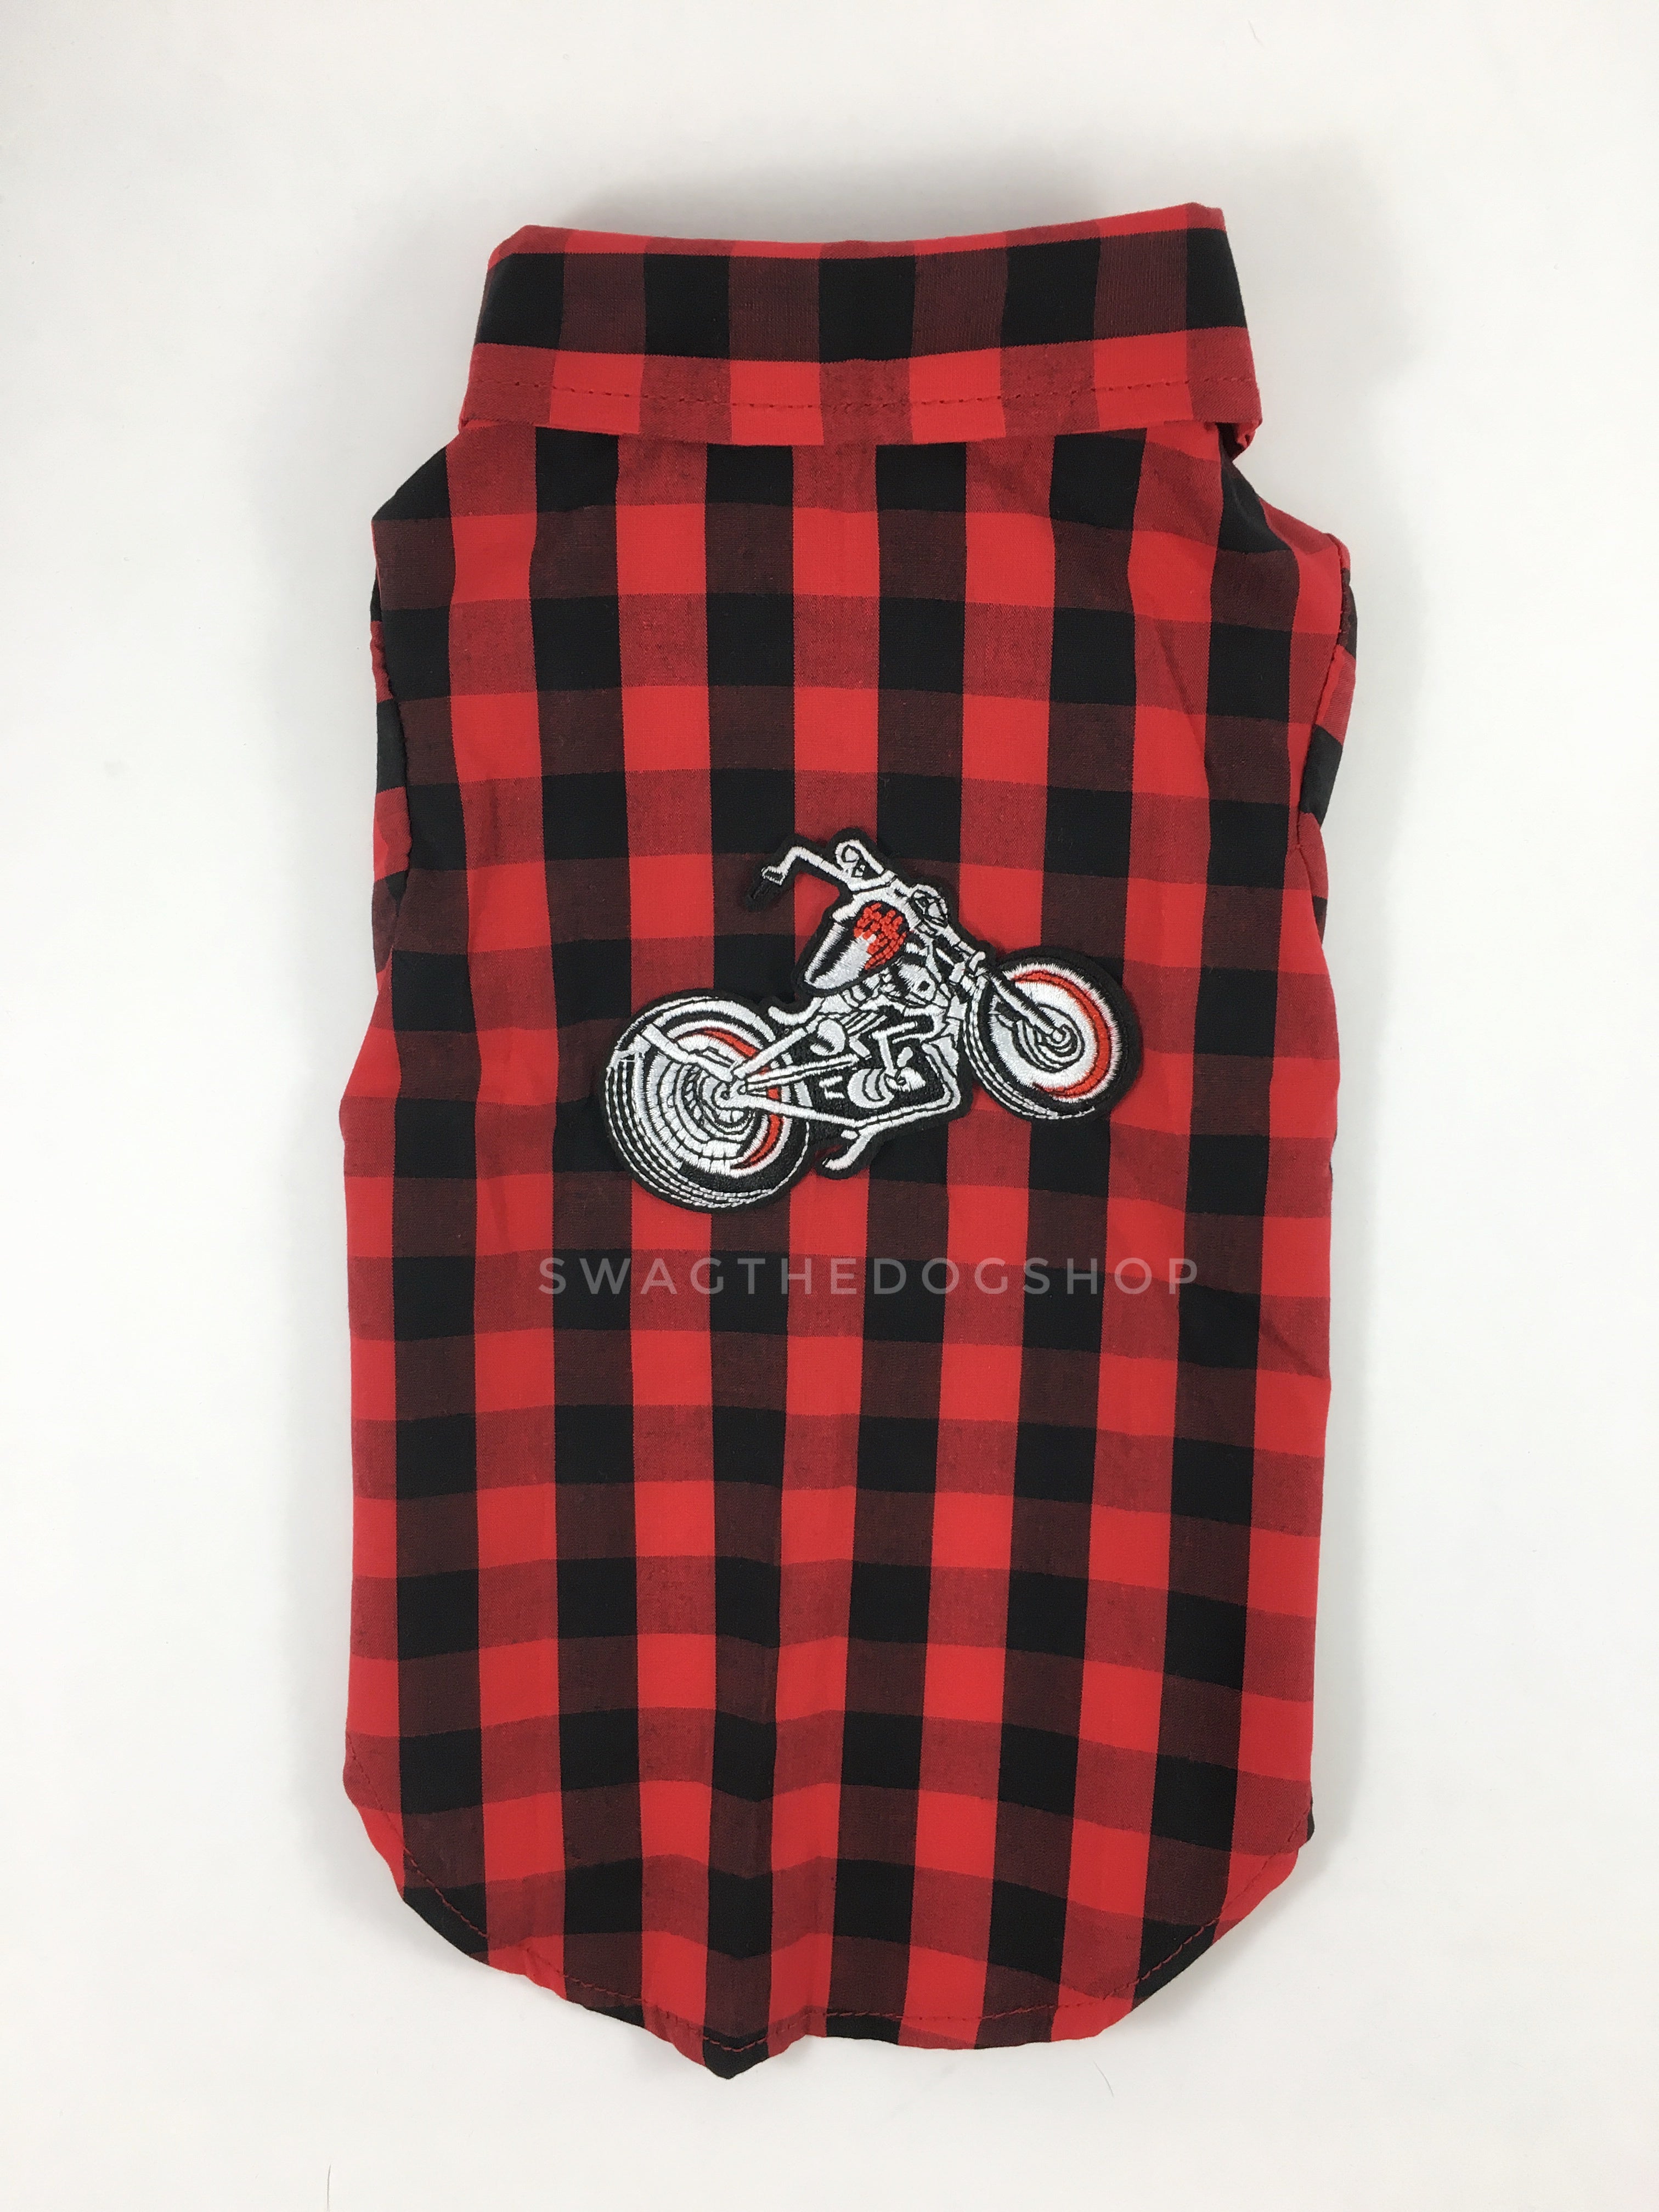 Kenora Summer Shirt - Patch Add-on of Motorcycle on the Back. Black and Red Gingham Shirt